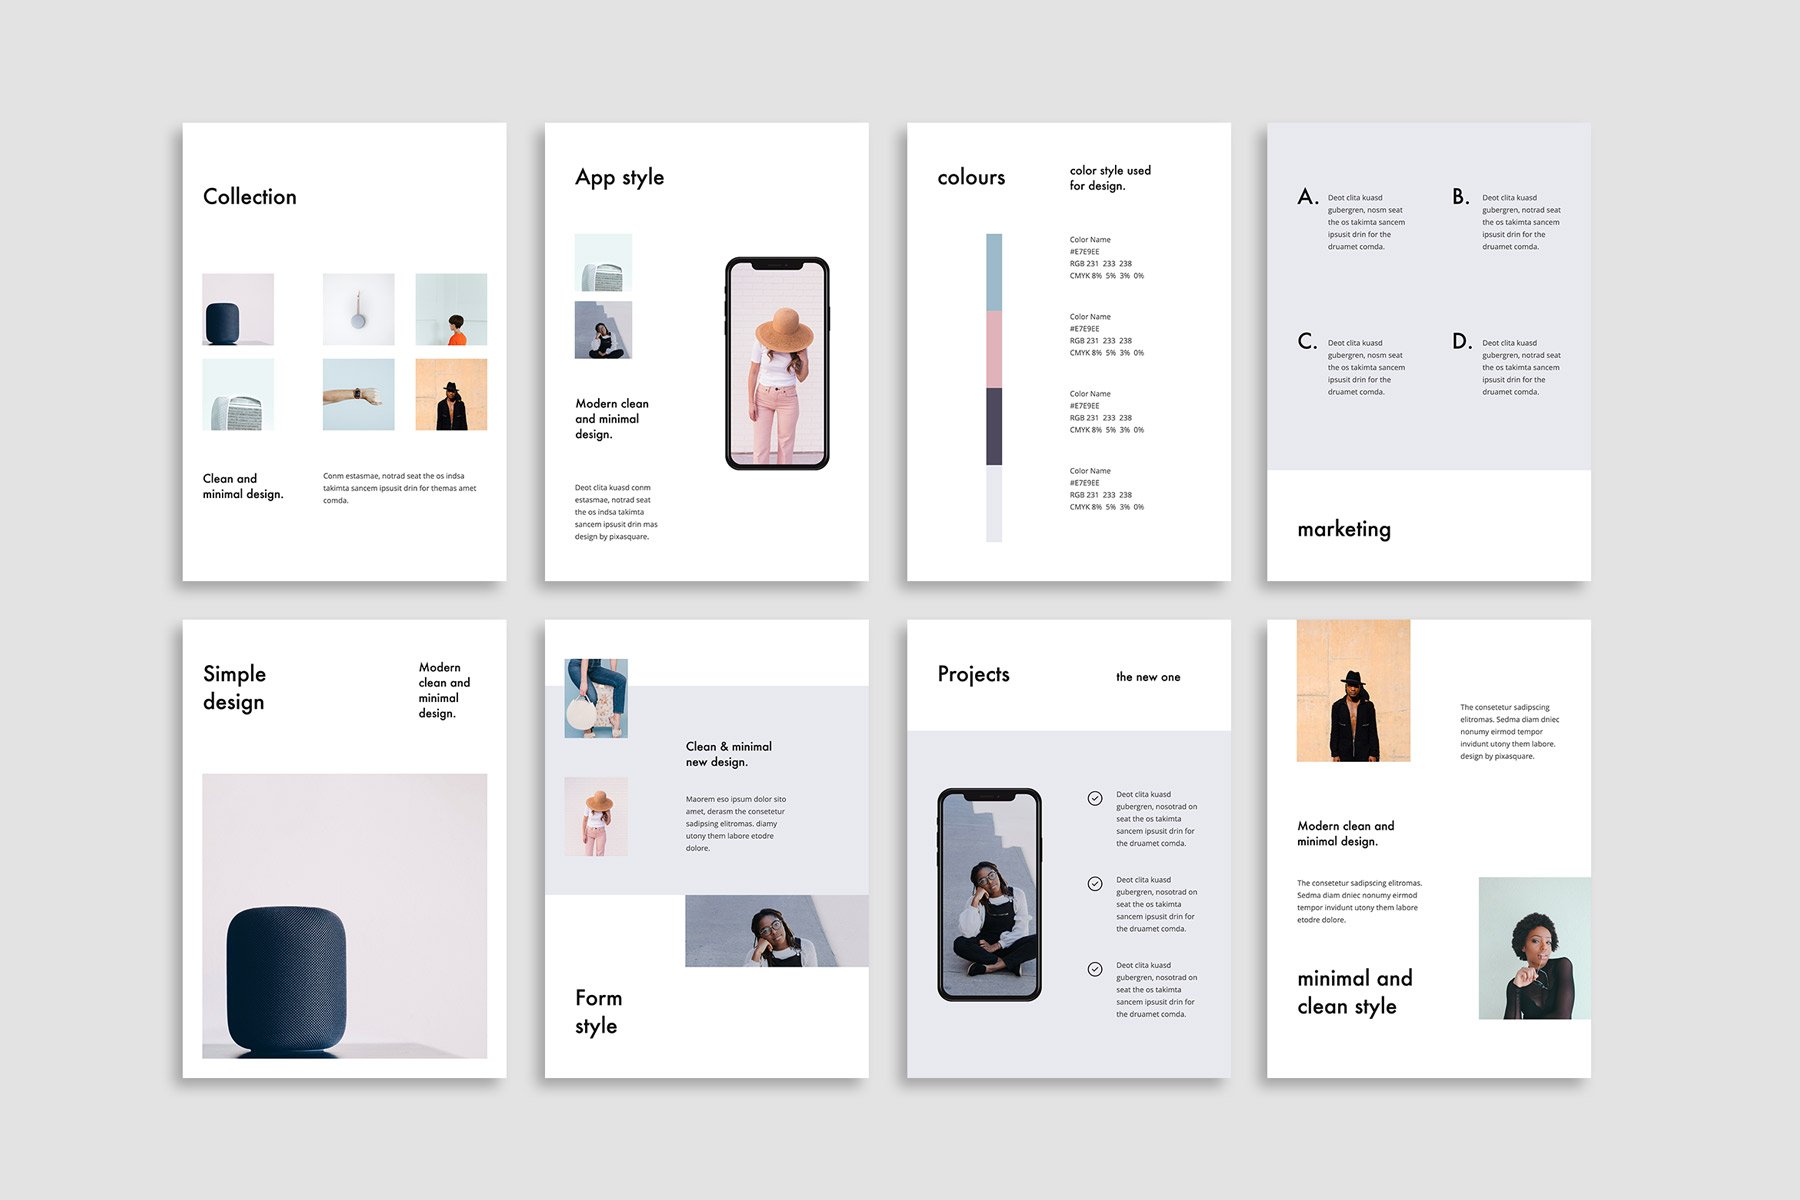 Form is a mobile friendly template with an adaptive design.